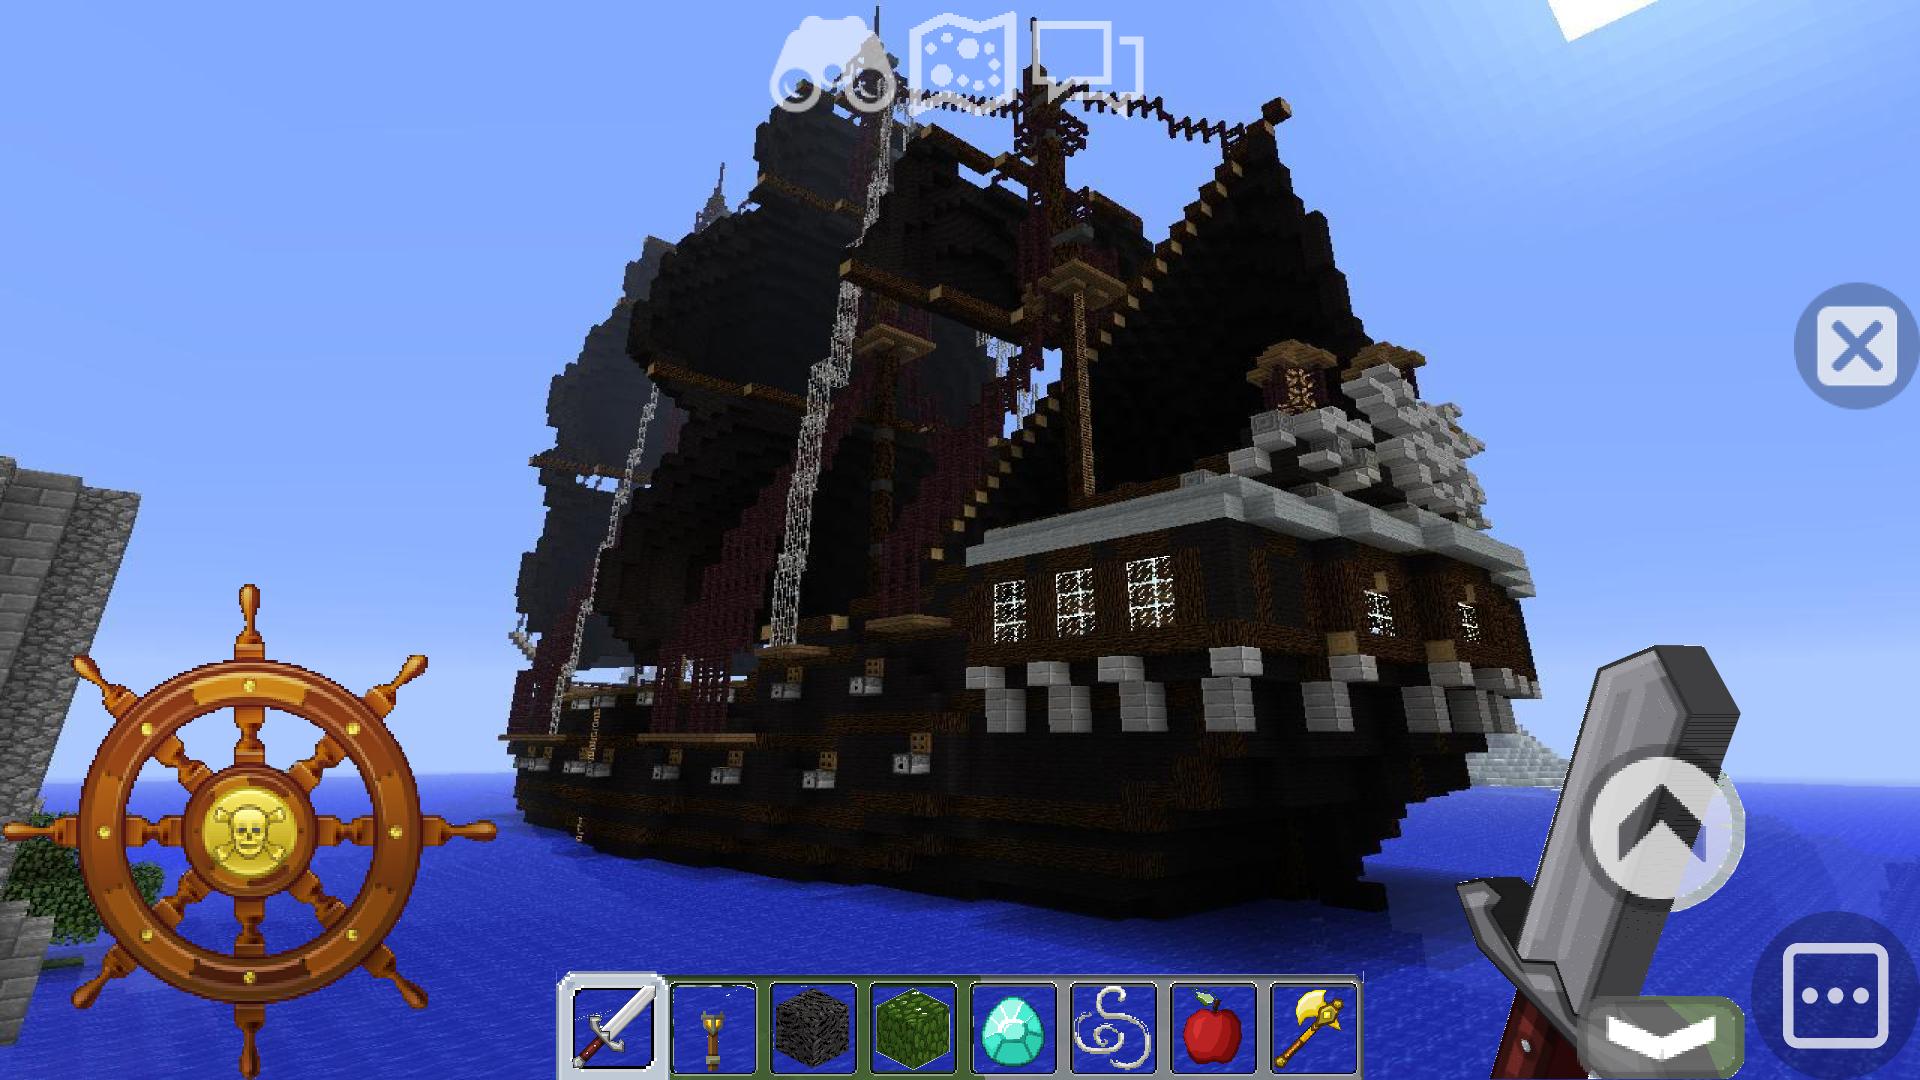 Pirate Craft for Android - APK Download